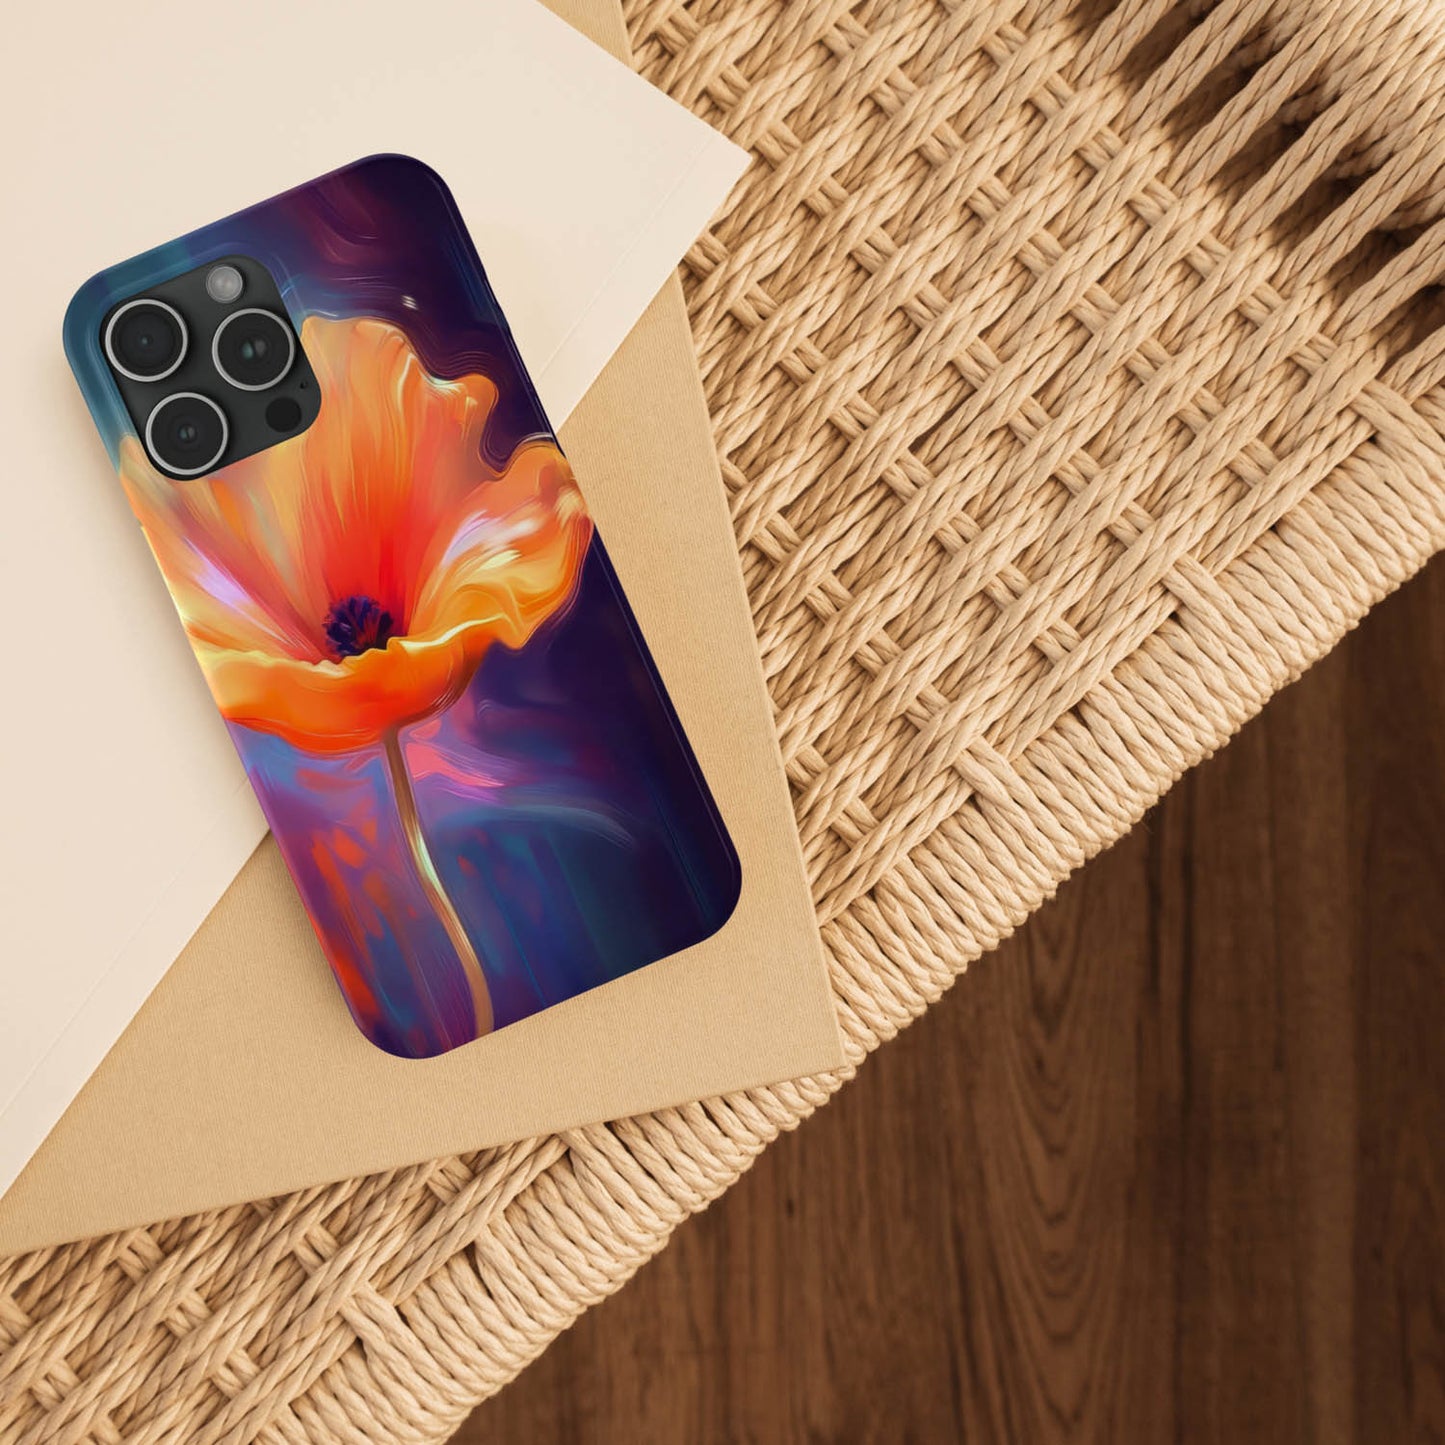 Sole Flower iPhone Case